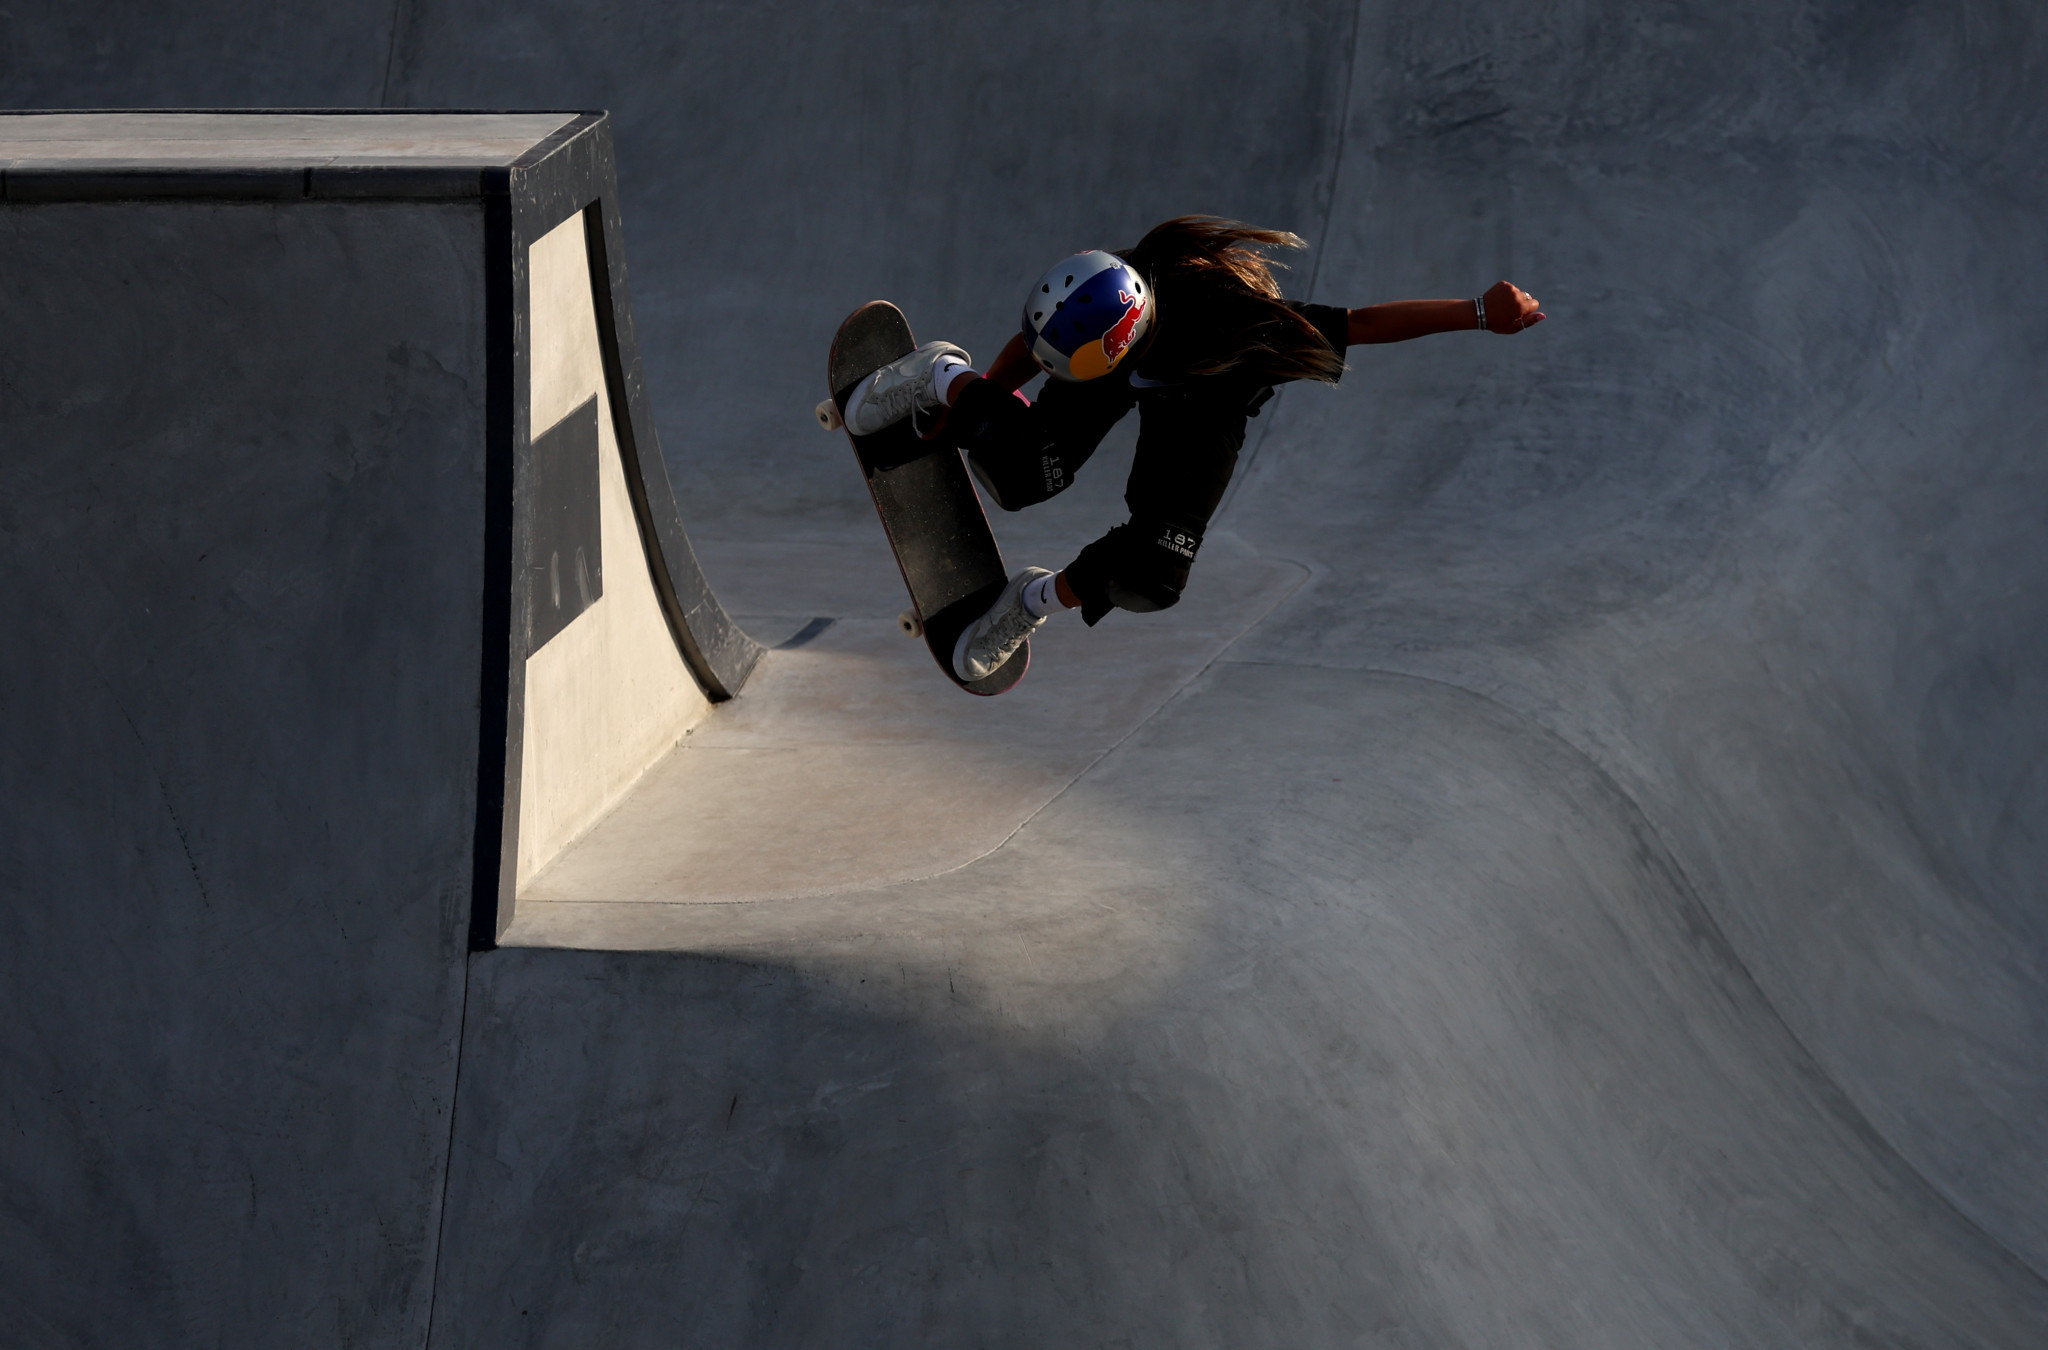 Brown and Akio lead athletes into World Park Skateboarding Championships finals